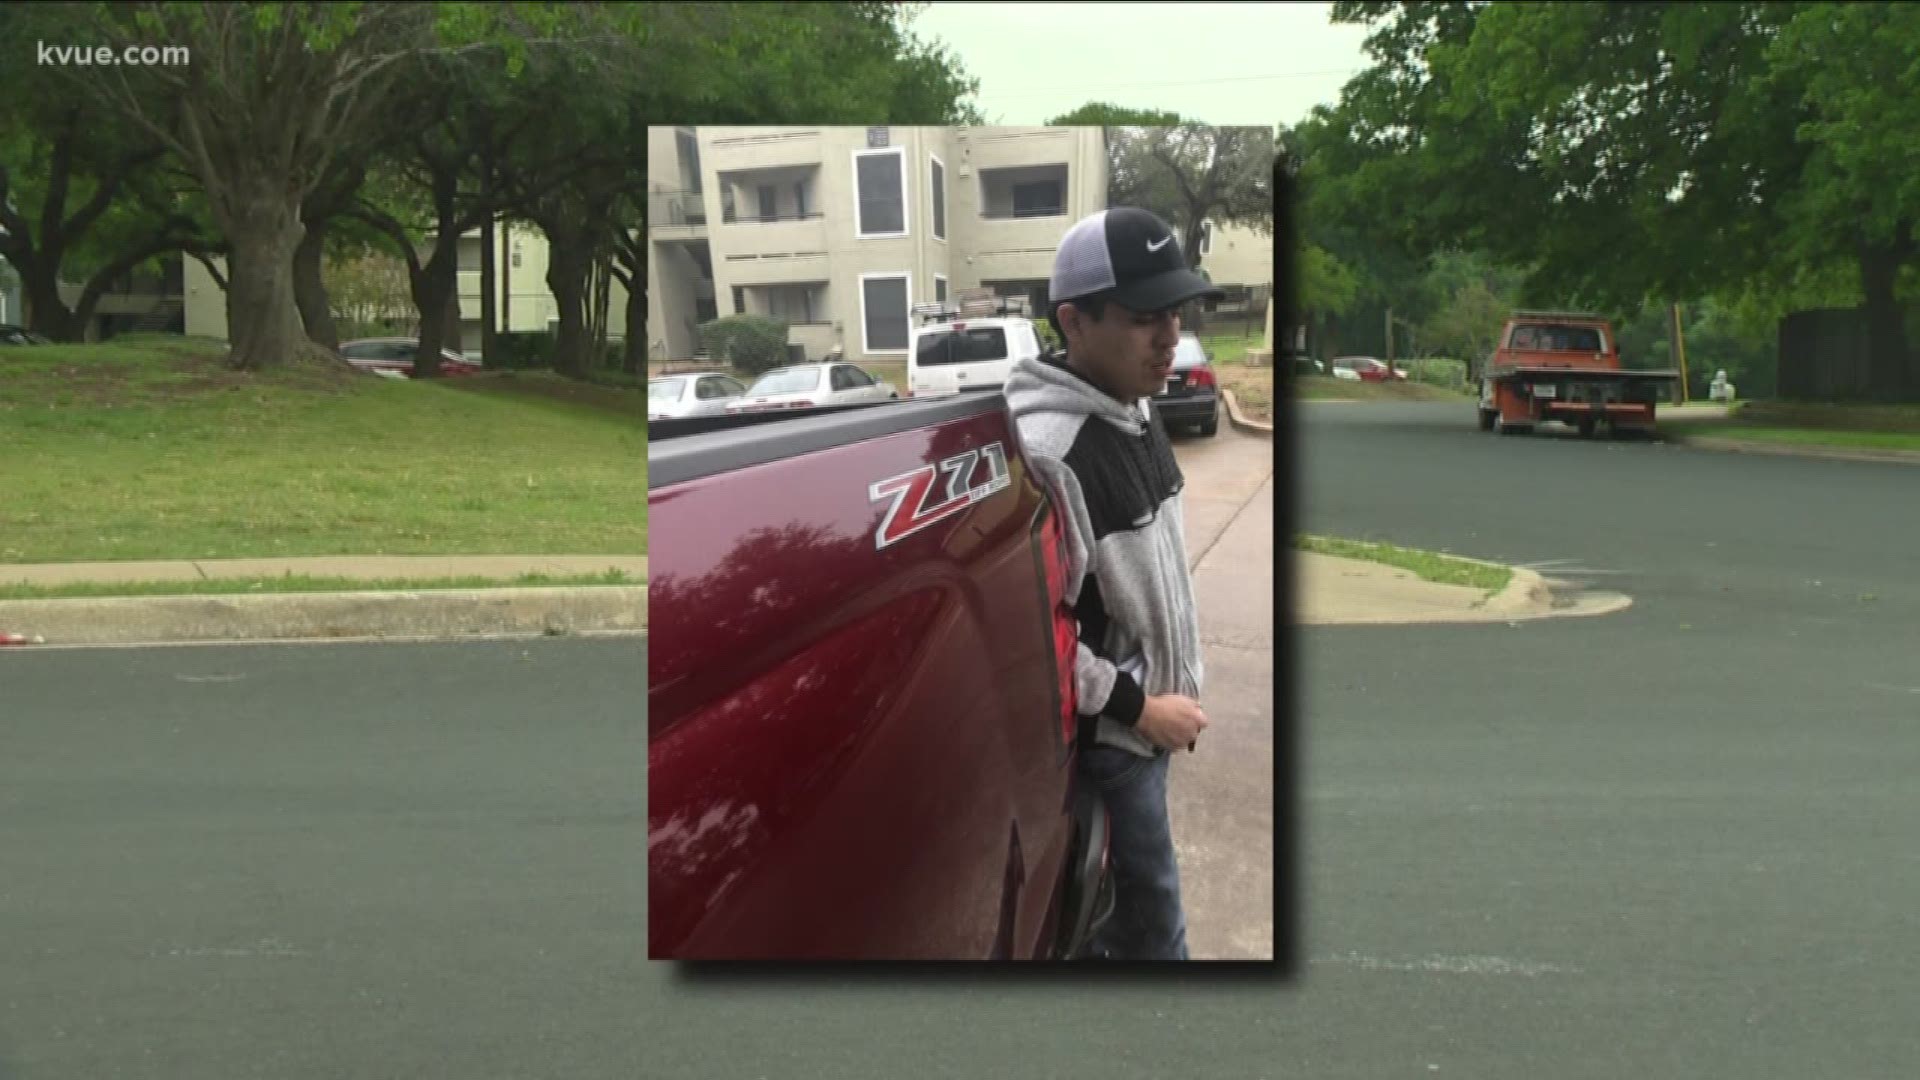 It's happened again - a stolen truck sold to an unsuspecting victim in the Austin area.